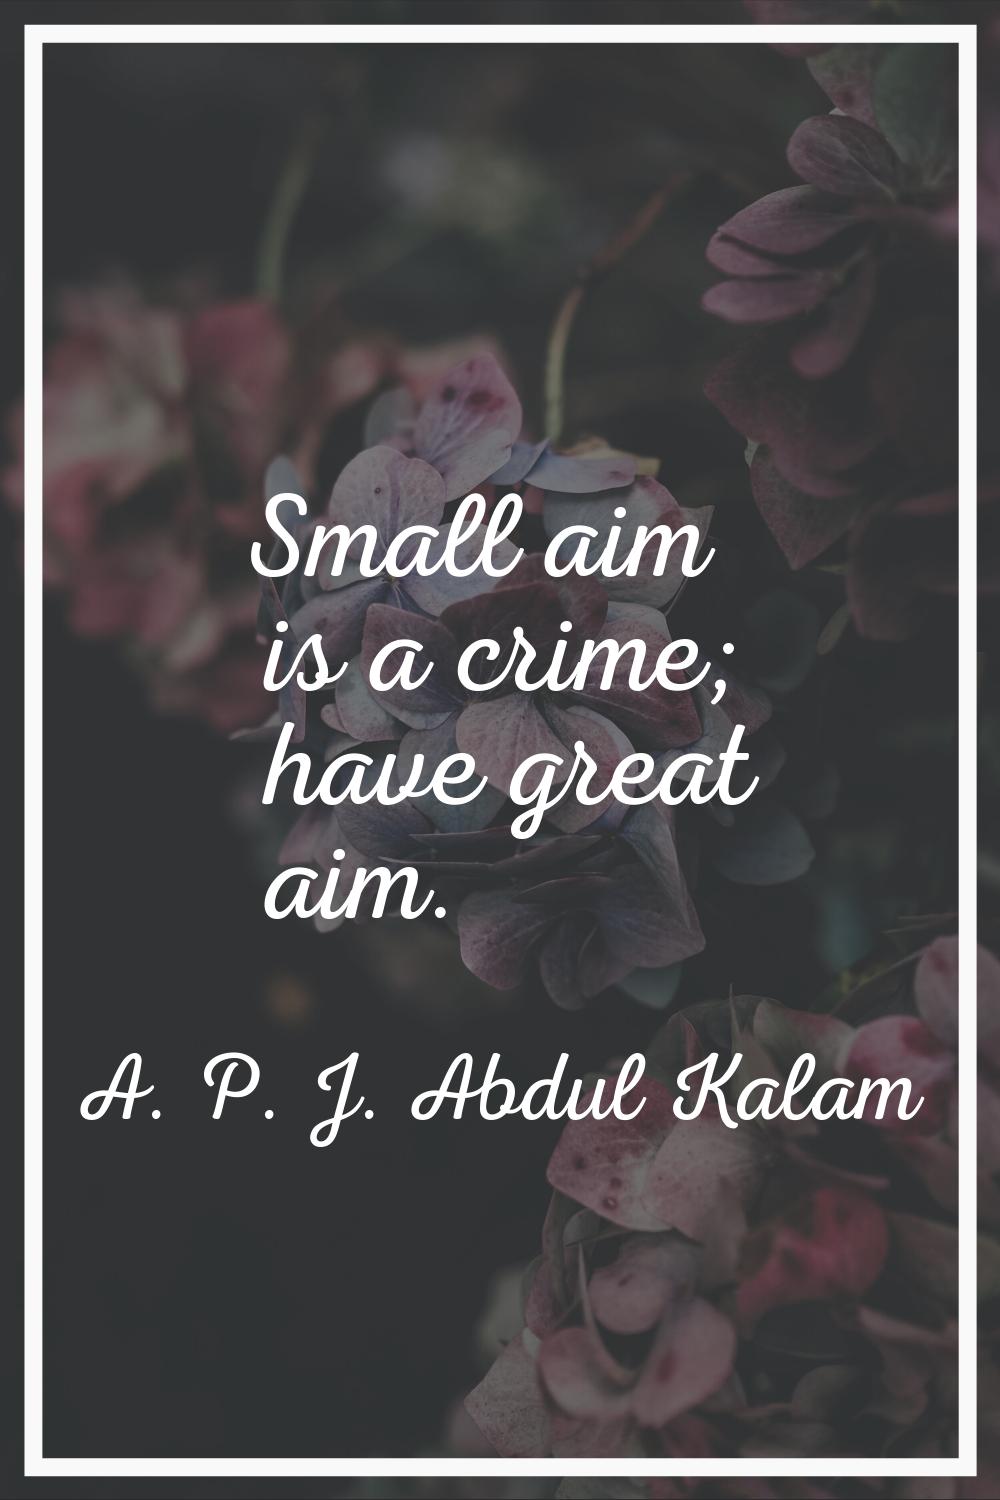 Small aim is a crime; have great aim.